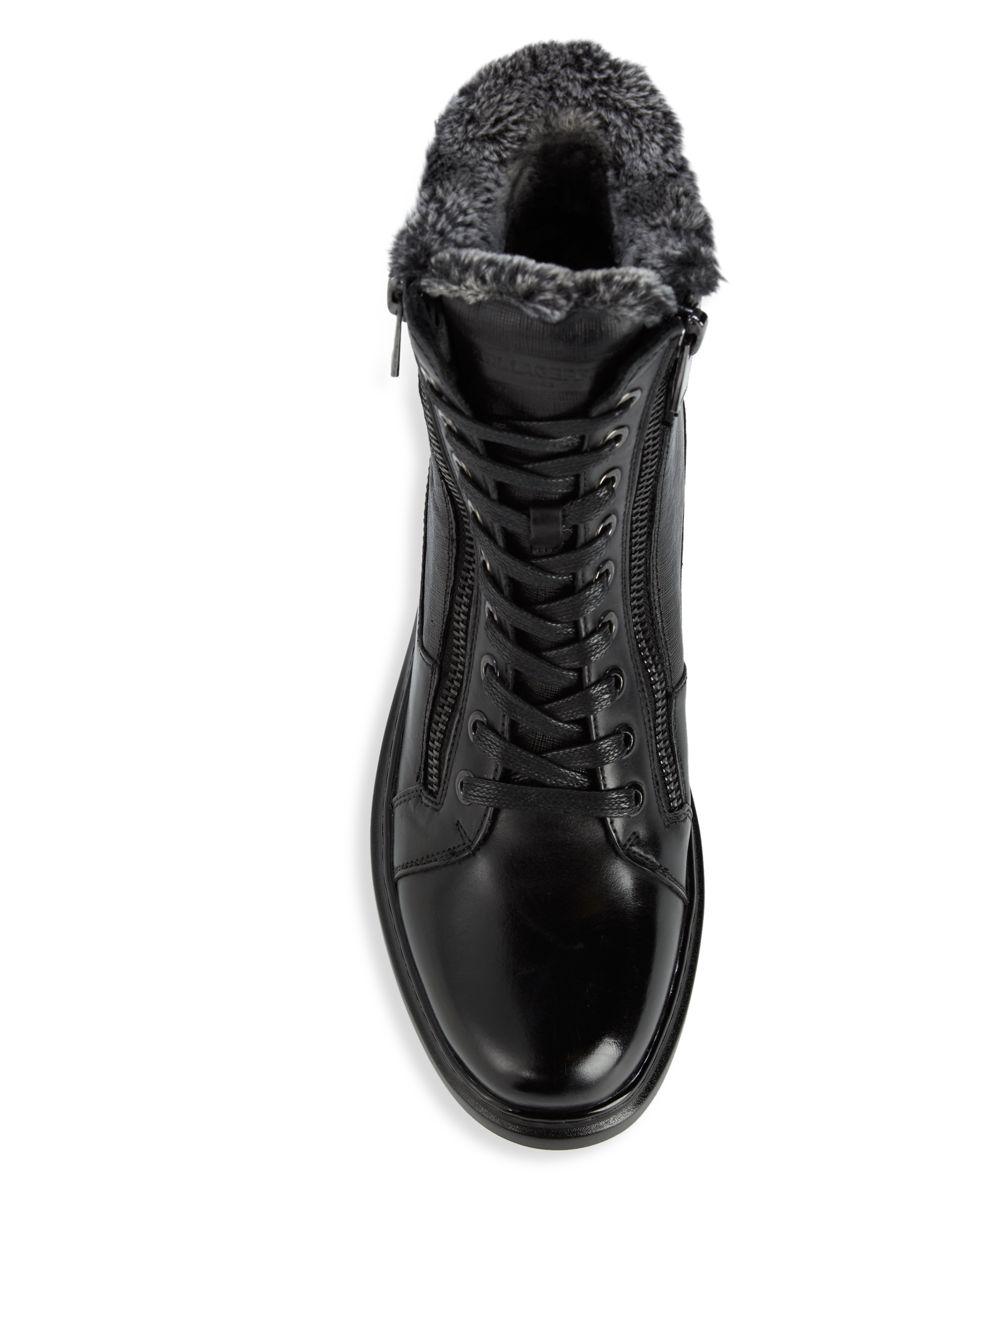 Karl Lagerfeld Faux Fur-lined Leather Boots in Black for Men - Lyst